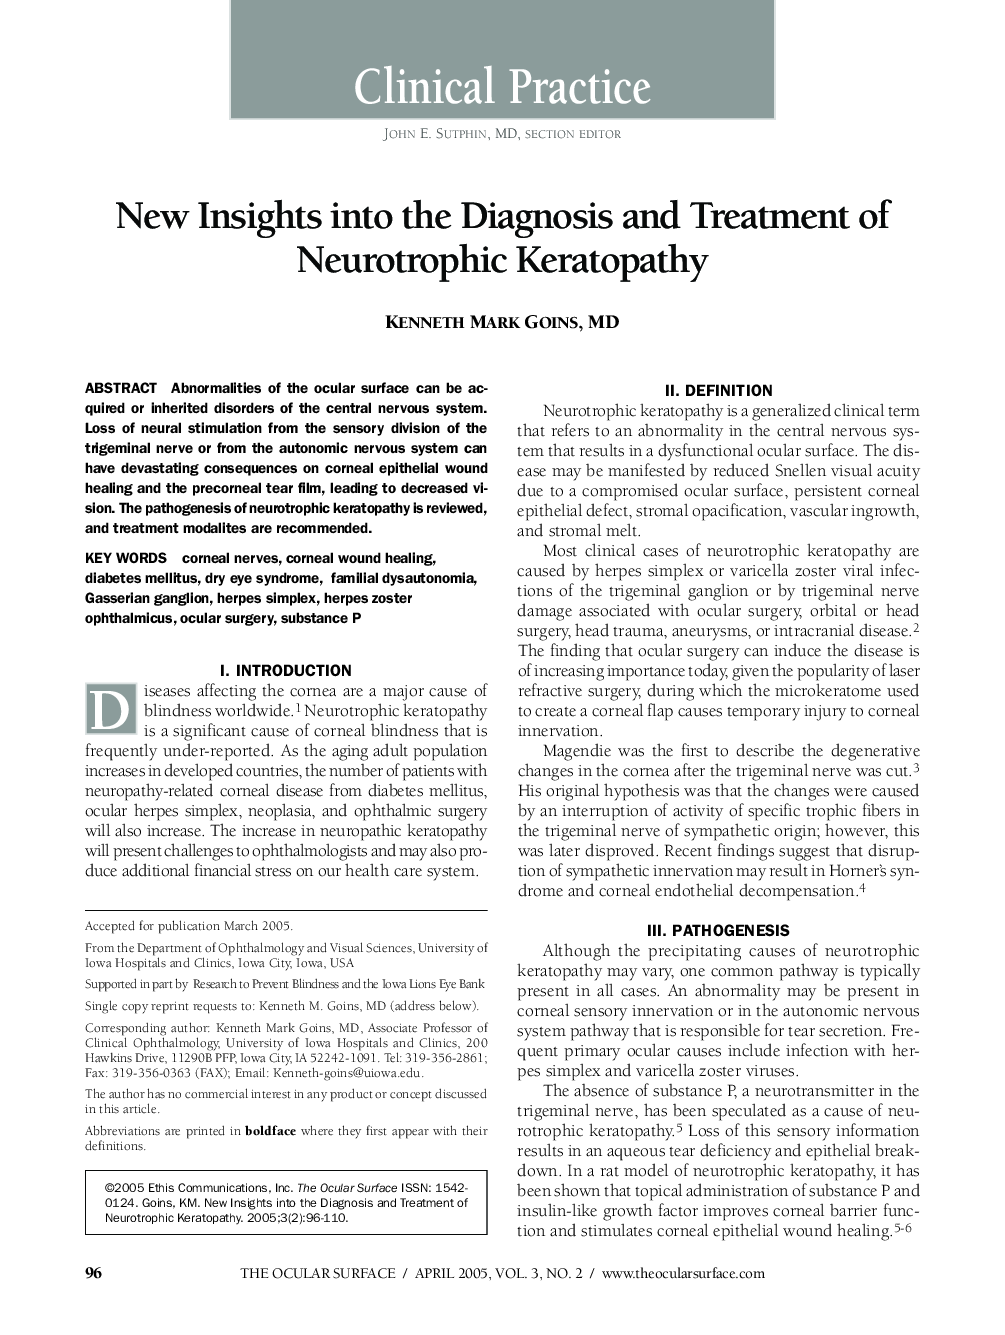 New Insights into the Diagnosis and Treatment of Neurotrophic Keratopathy